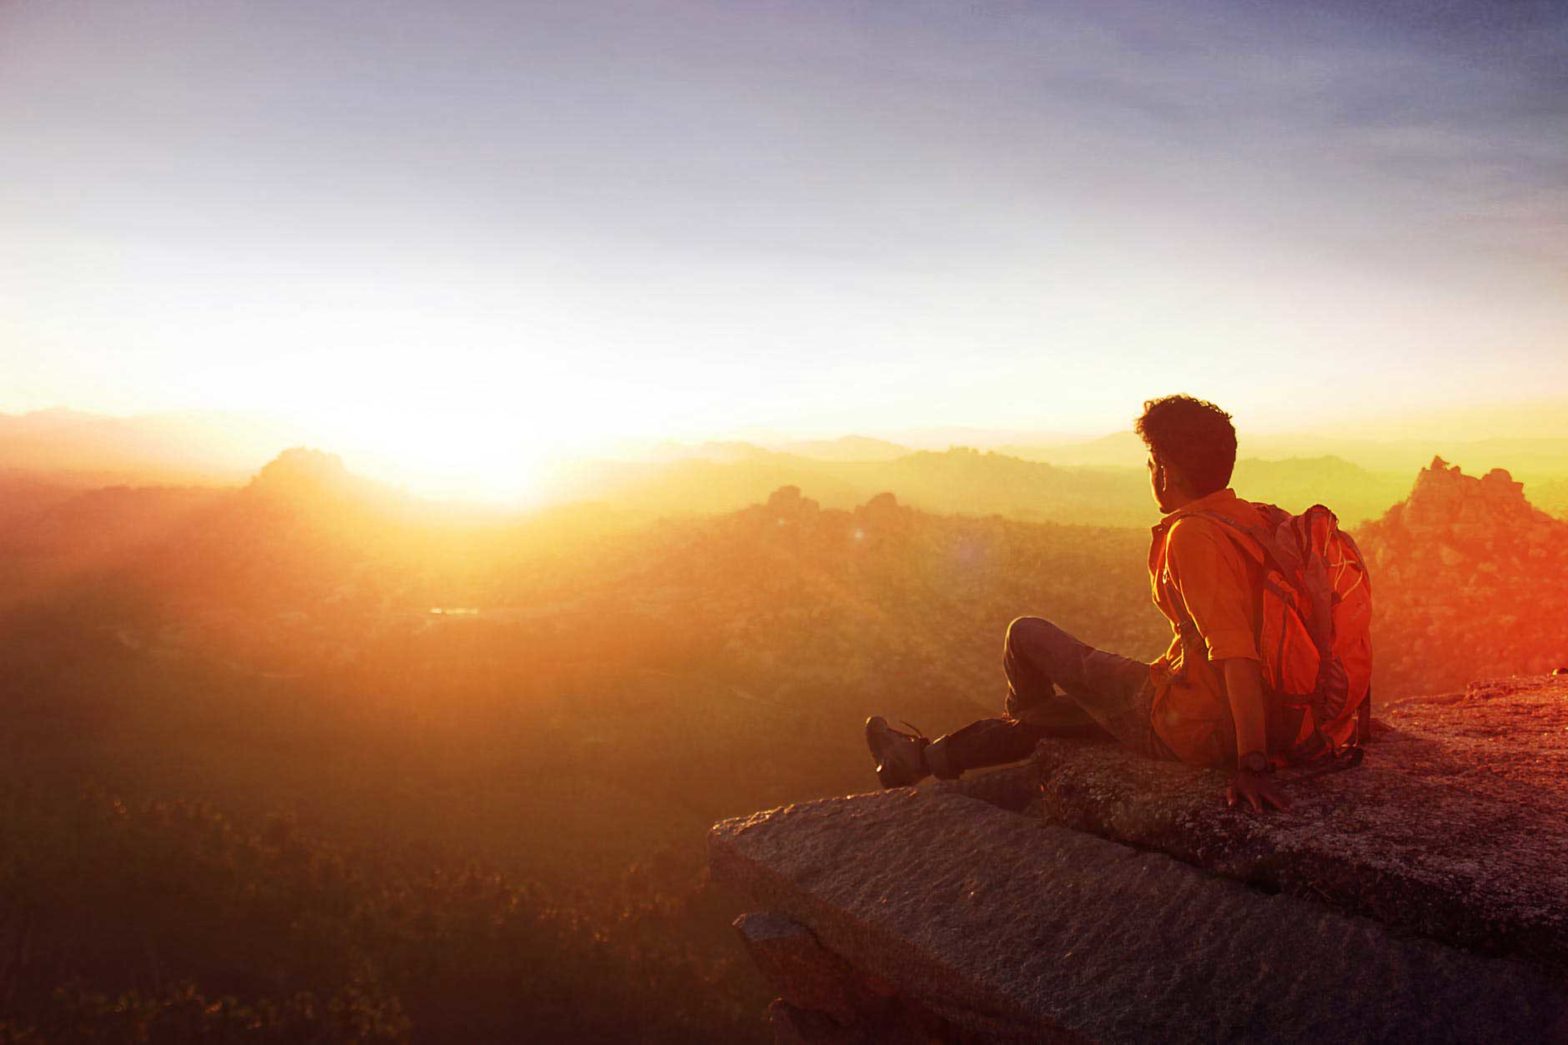 hiker overlooking sunrise from cliff illustrating the choice misery in addiction or freedom in life